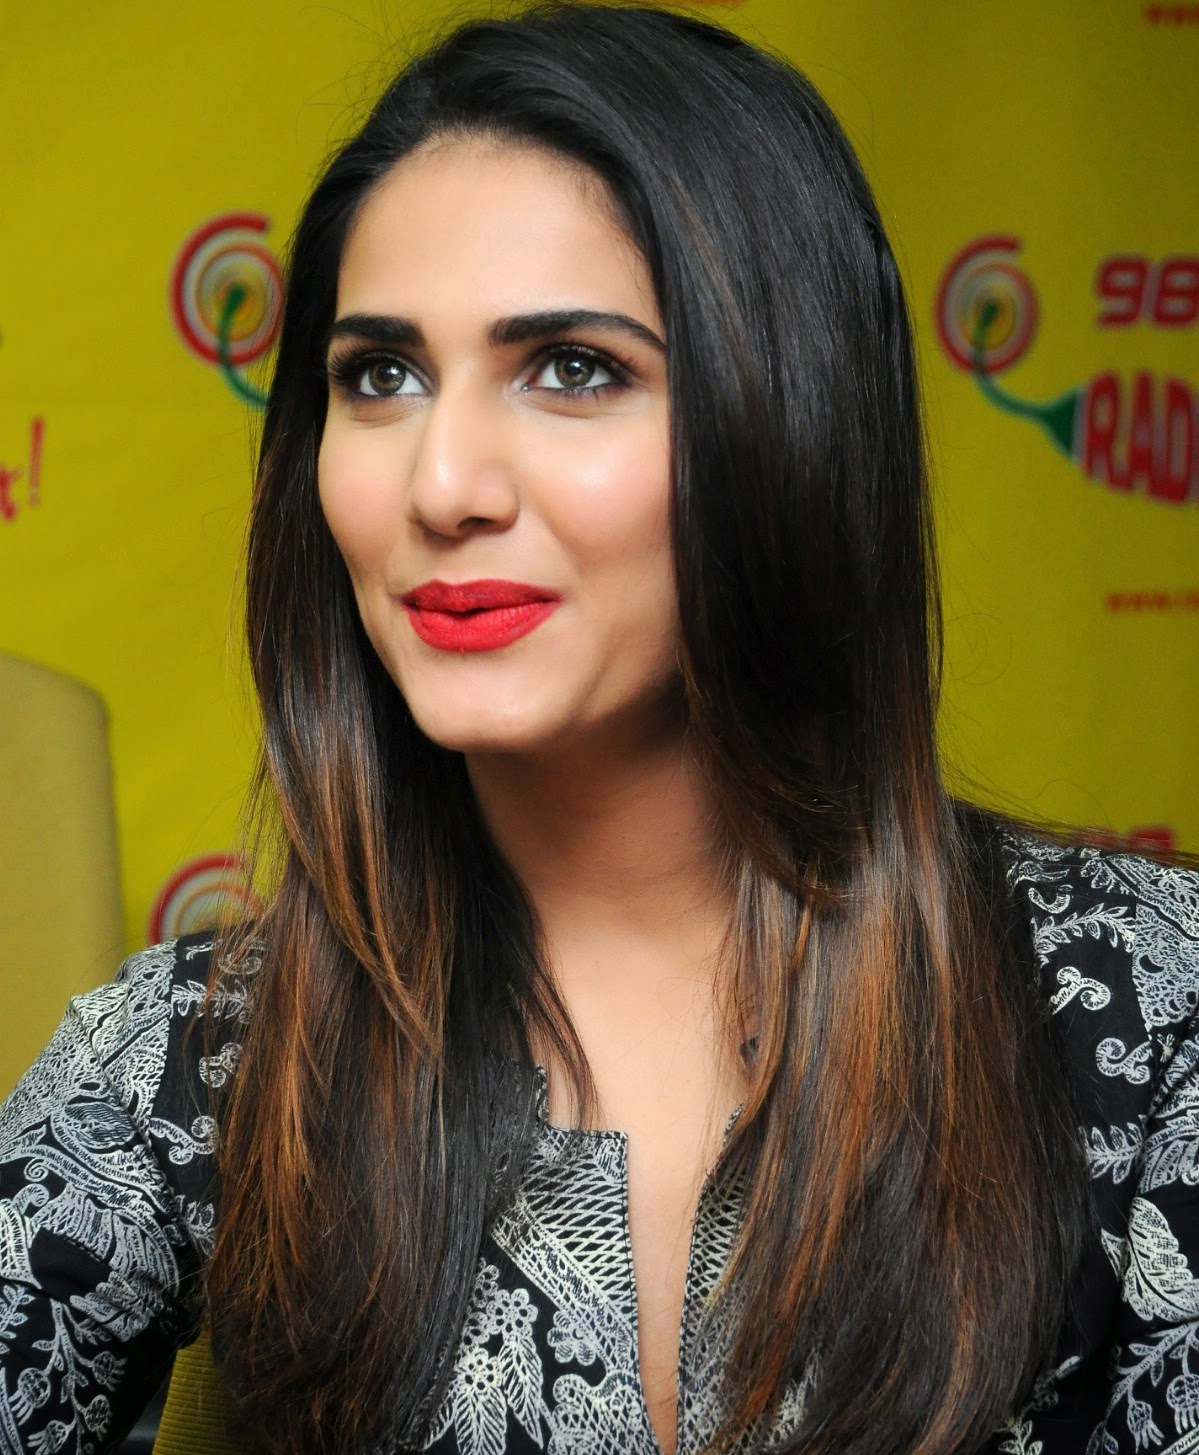 High Quality Bollywood Celebrity Pictures Vaani Kapoor Free Download